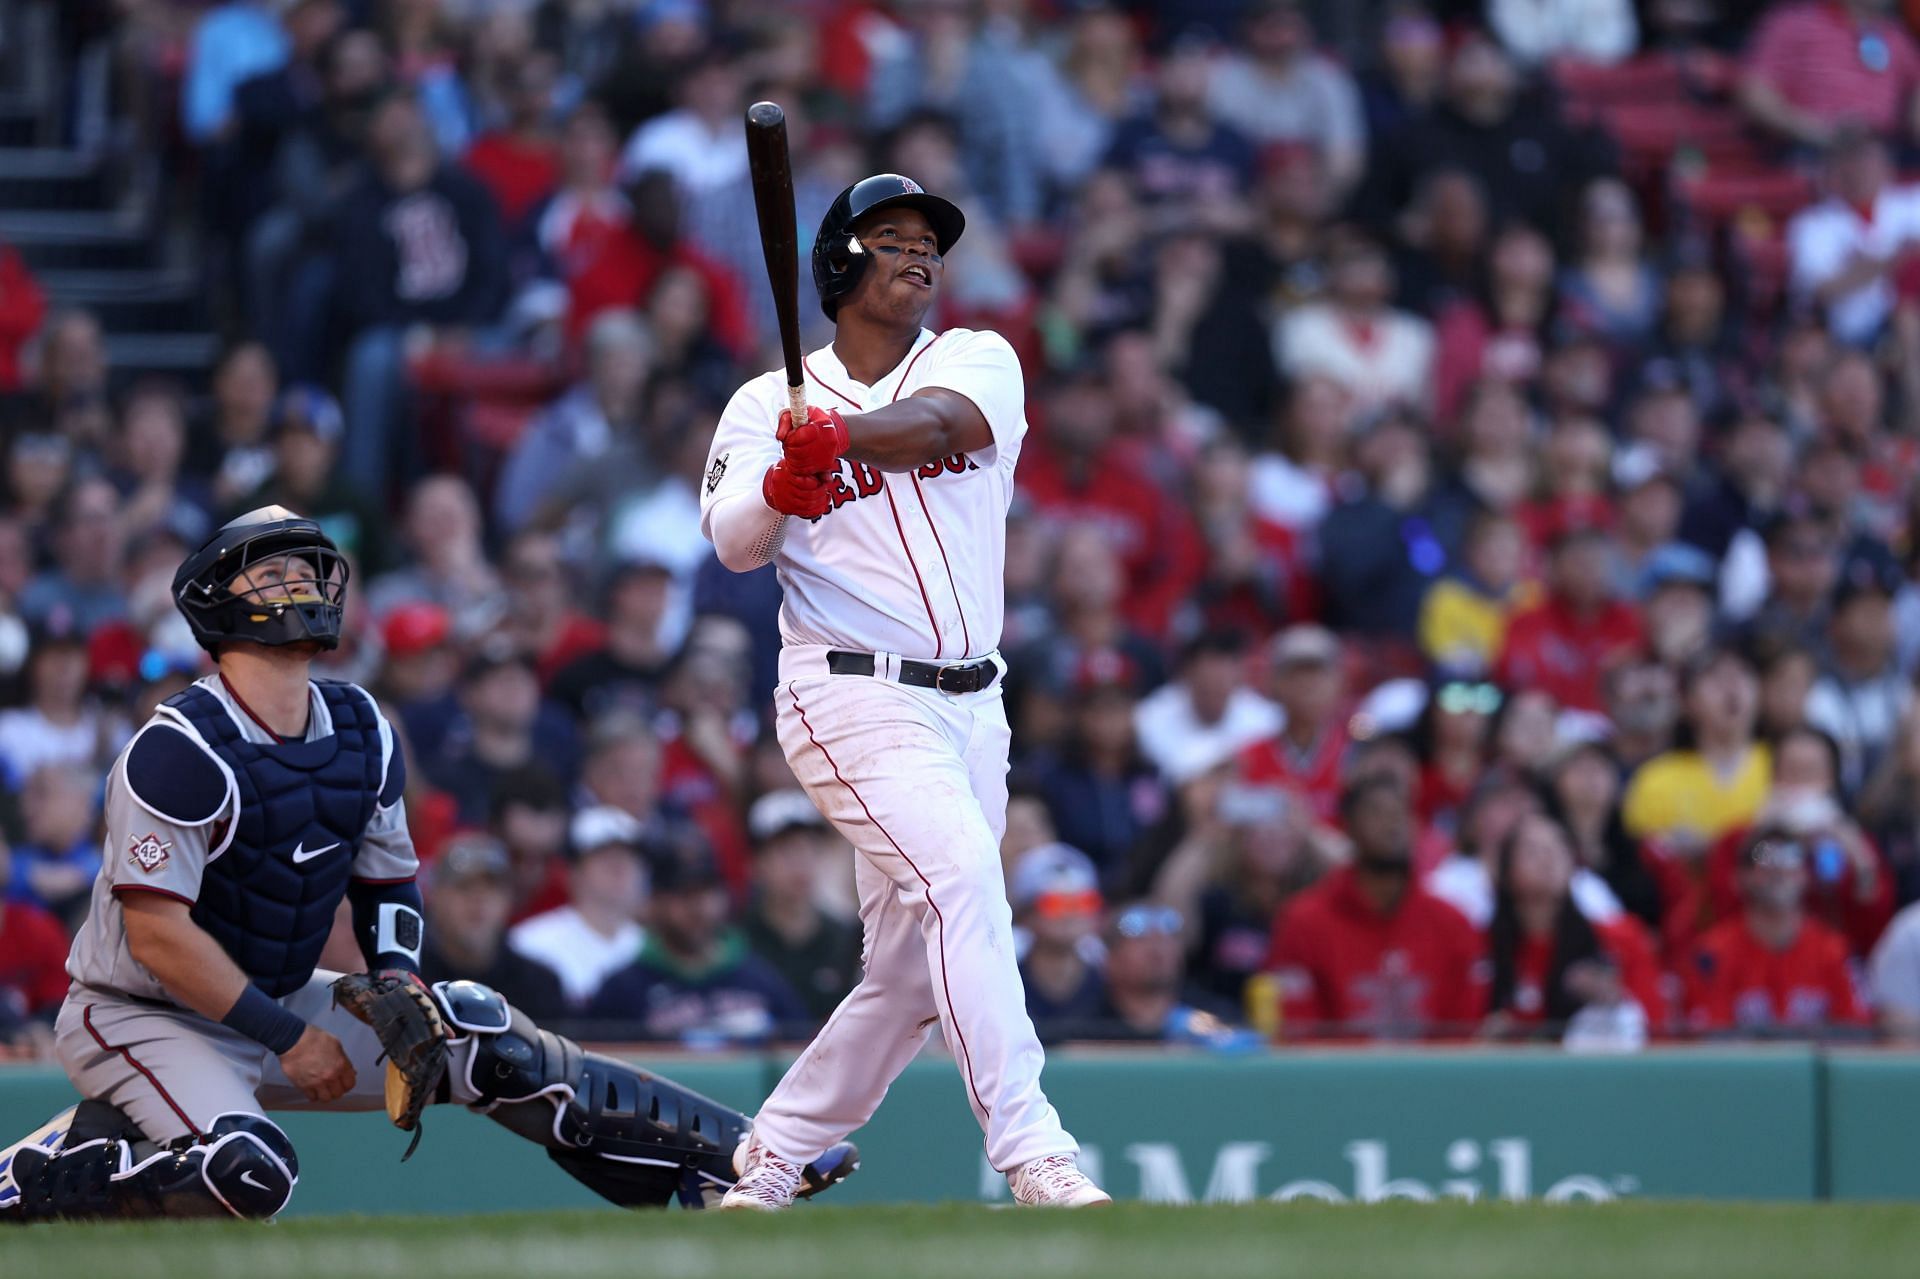 Devers batting for the Red Sox